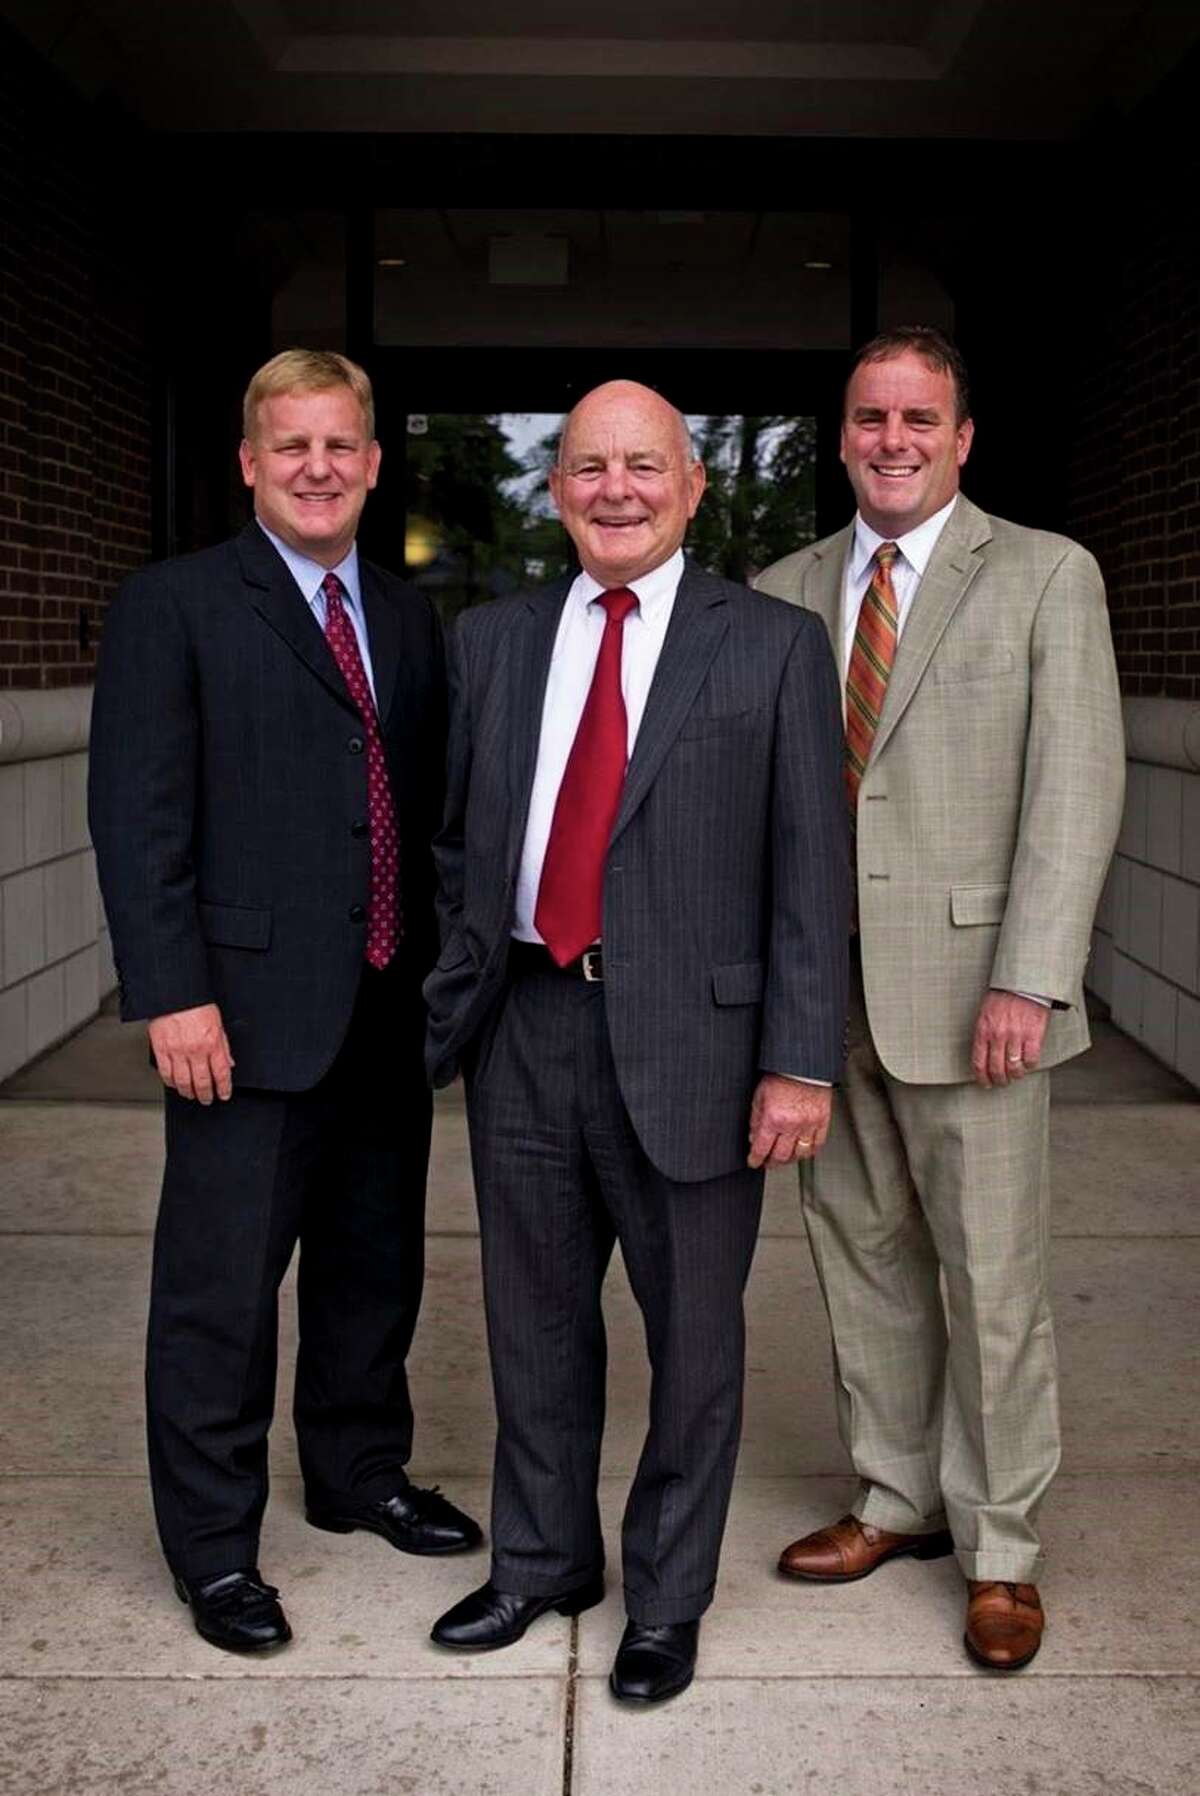 Pictured are Karl, Cal, and Kurt Ieuter of Ieuter Insurance. (Photo Provided)